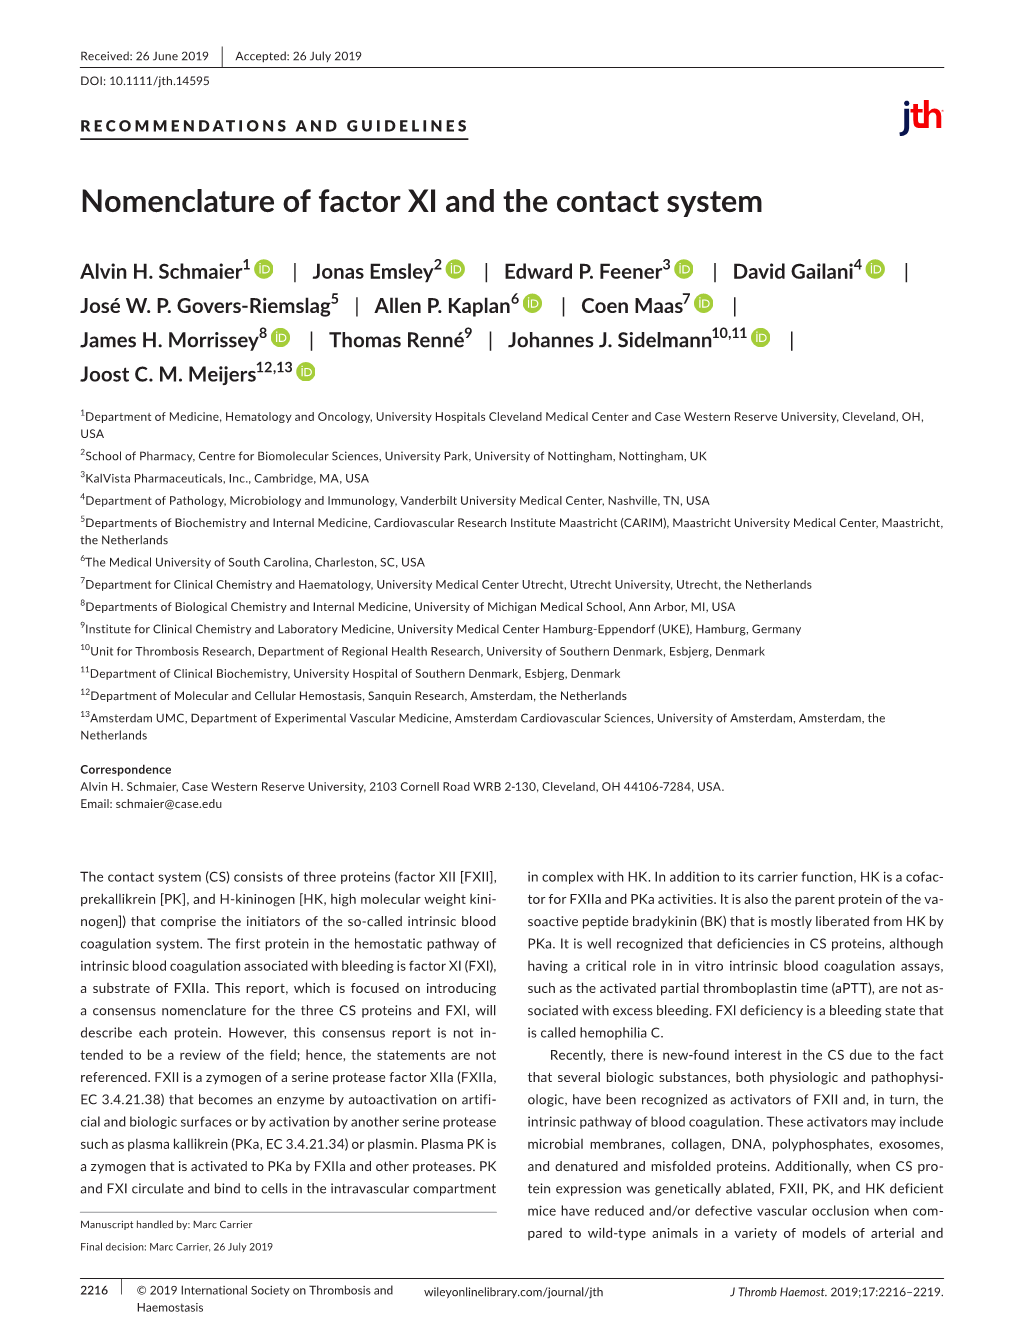 Nomenclature of Factor XI and the Contact System